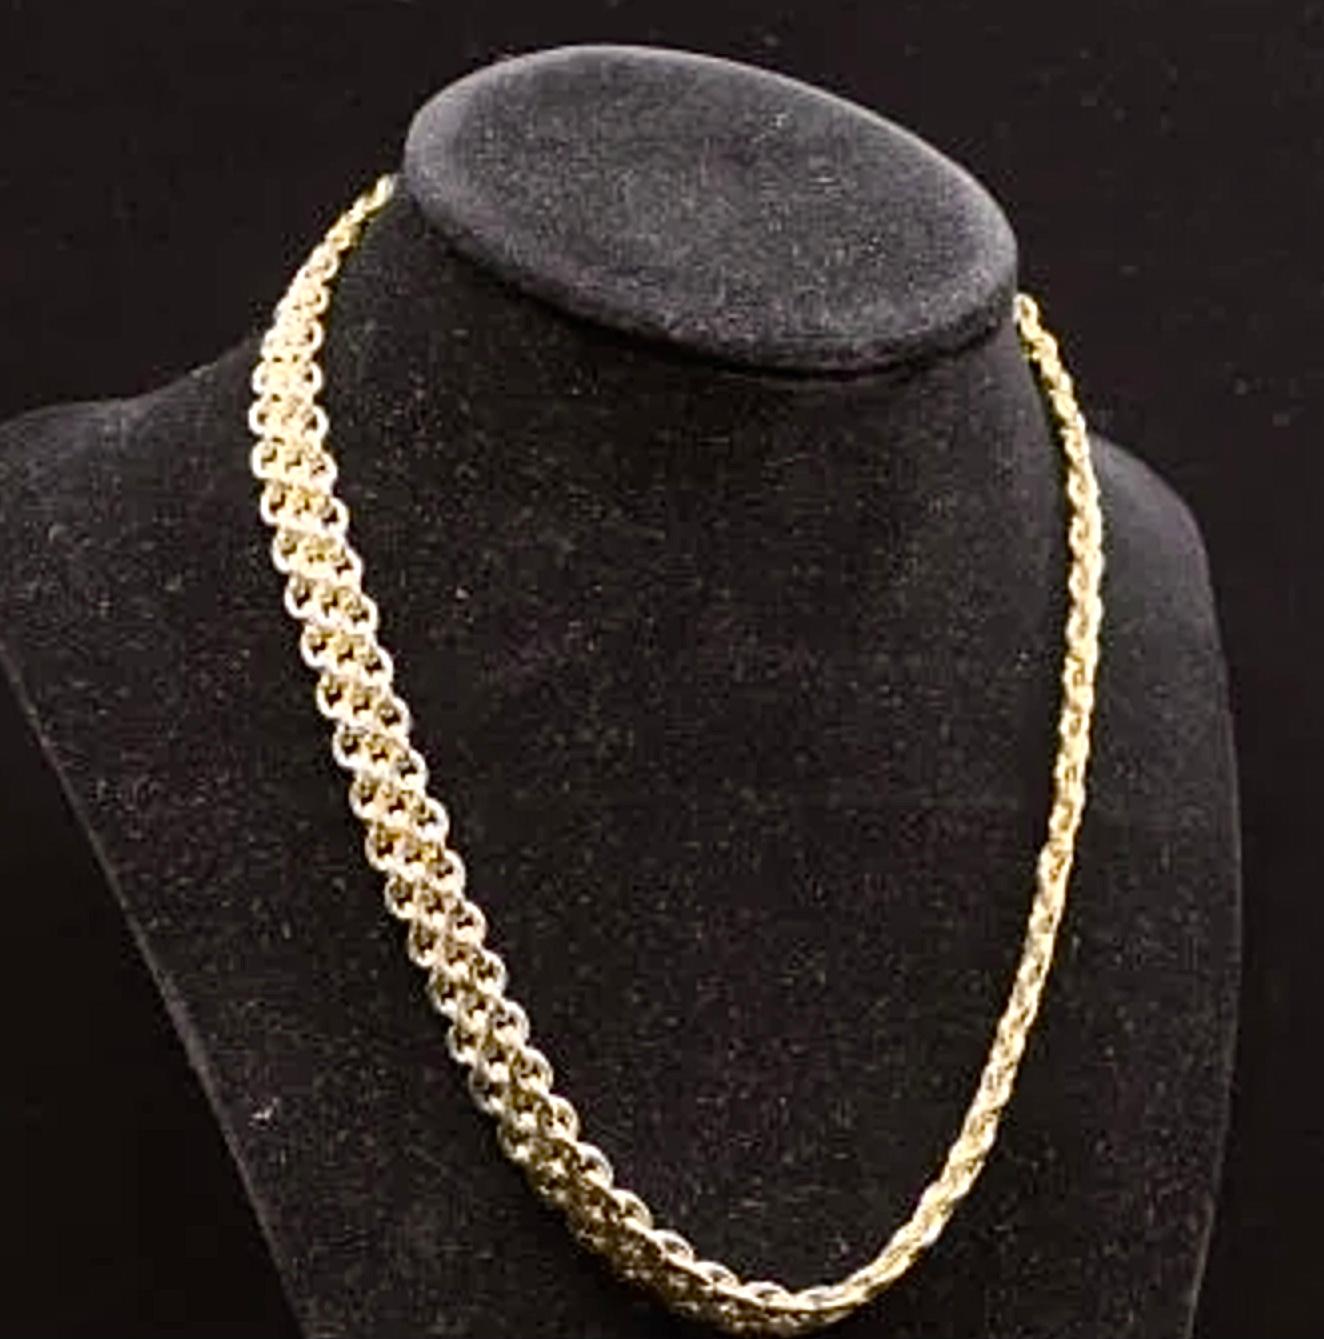 Beautiful, heavy 14k Italian gold link chain wide mesh necklace. The necklace measures 17 inches. It is marked 14k Italy and it weighs 30.8 Grams. Any darkness in the necklace is due to camera reflection. This beautiful necklace is offered here in